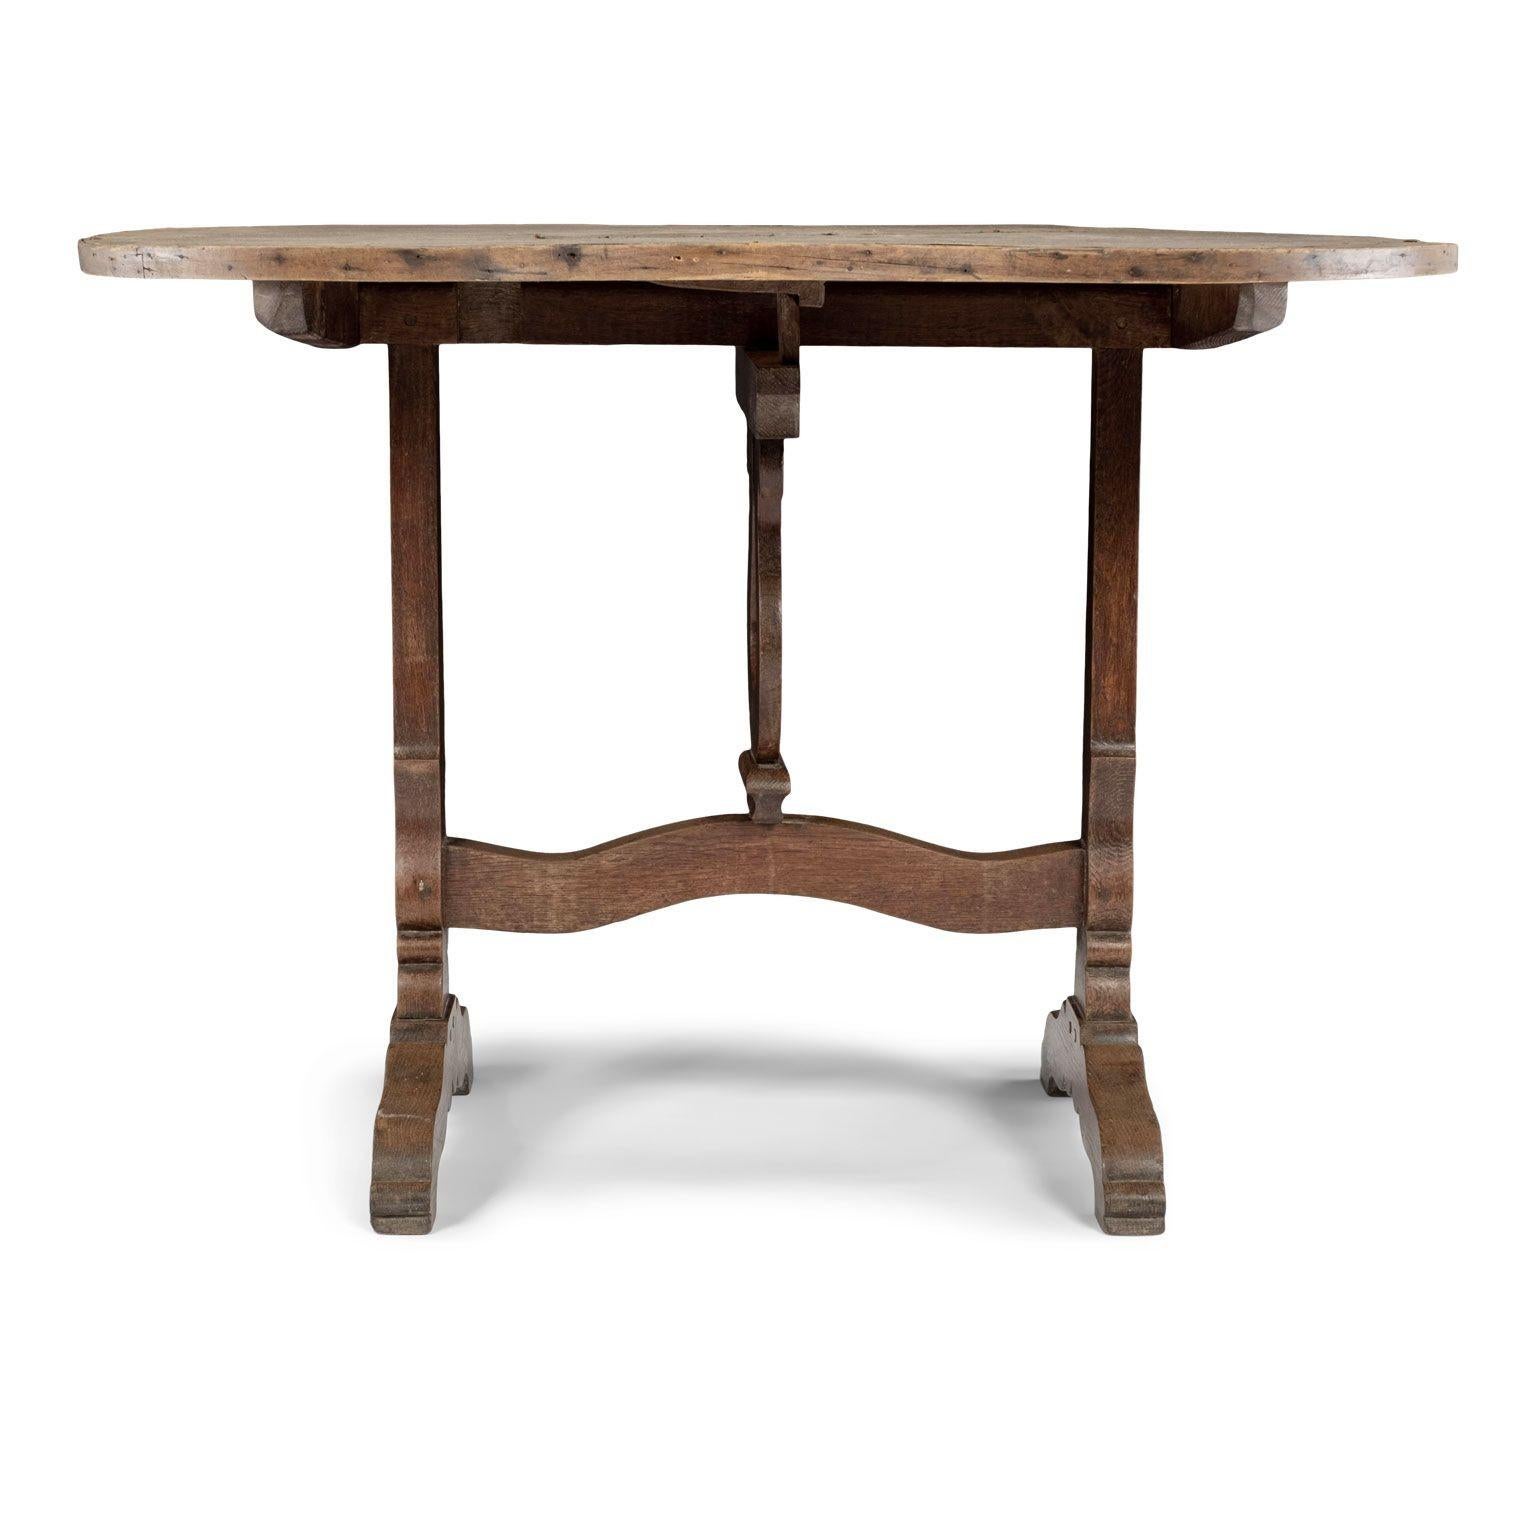 French tilt-top 'table de vendange,' or wine-tasting table circa 1870-1910. Large round top, covered in original canvas, circled by bentwood edge. Oak carved trestle base with lyre-shape harp mechanism. All hand-carved. Naturally semi-bleached